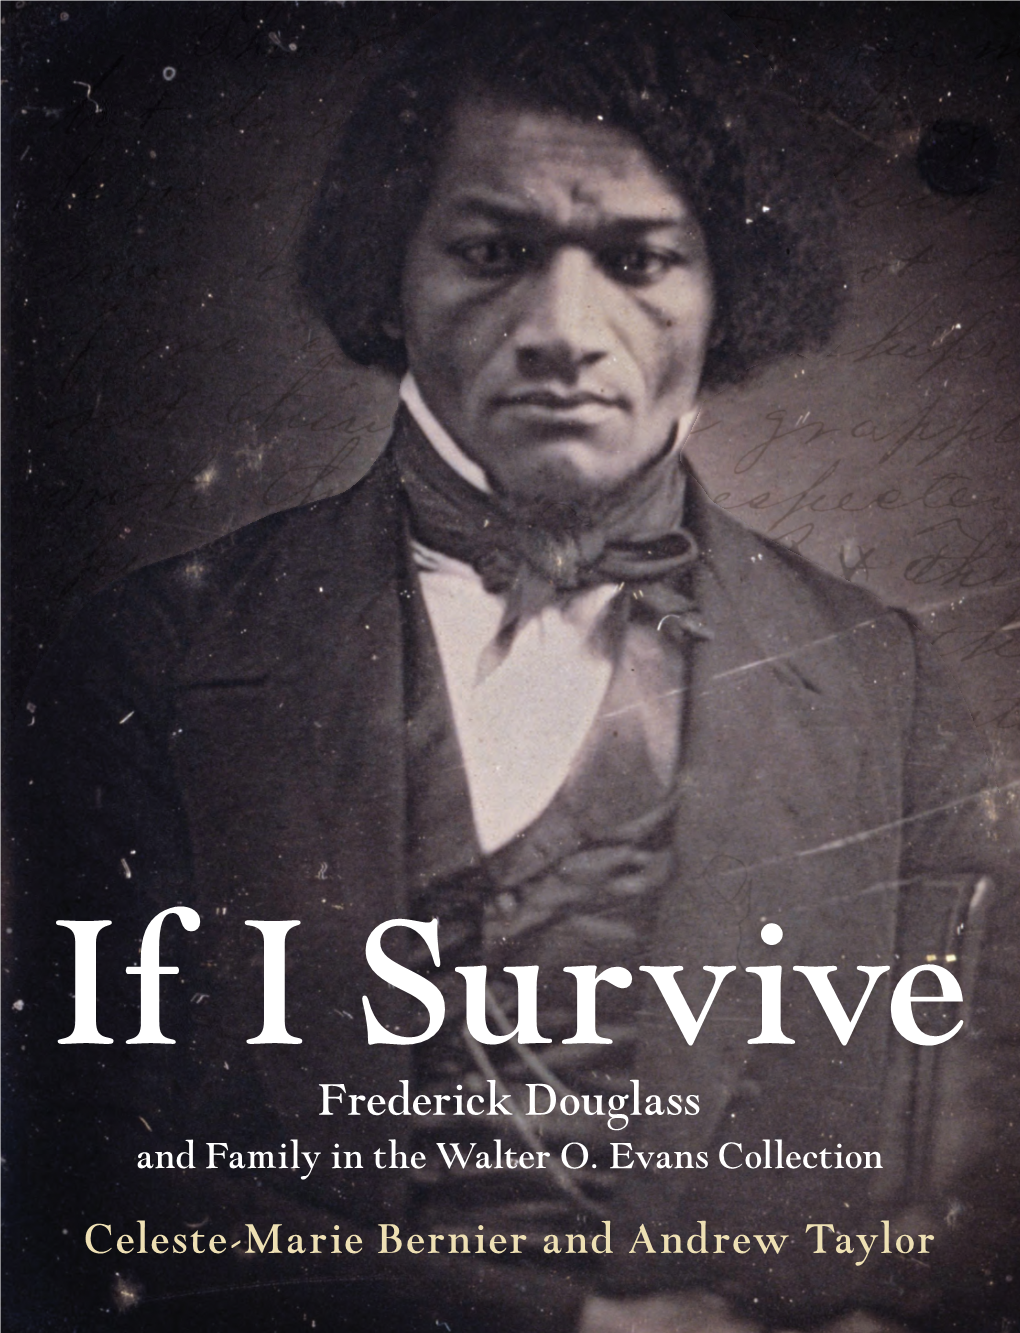 Frederick Douglass Family Story Foreword by Robert S